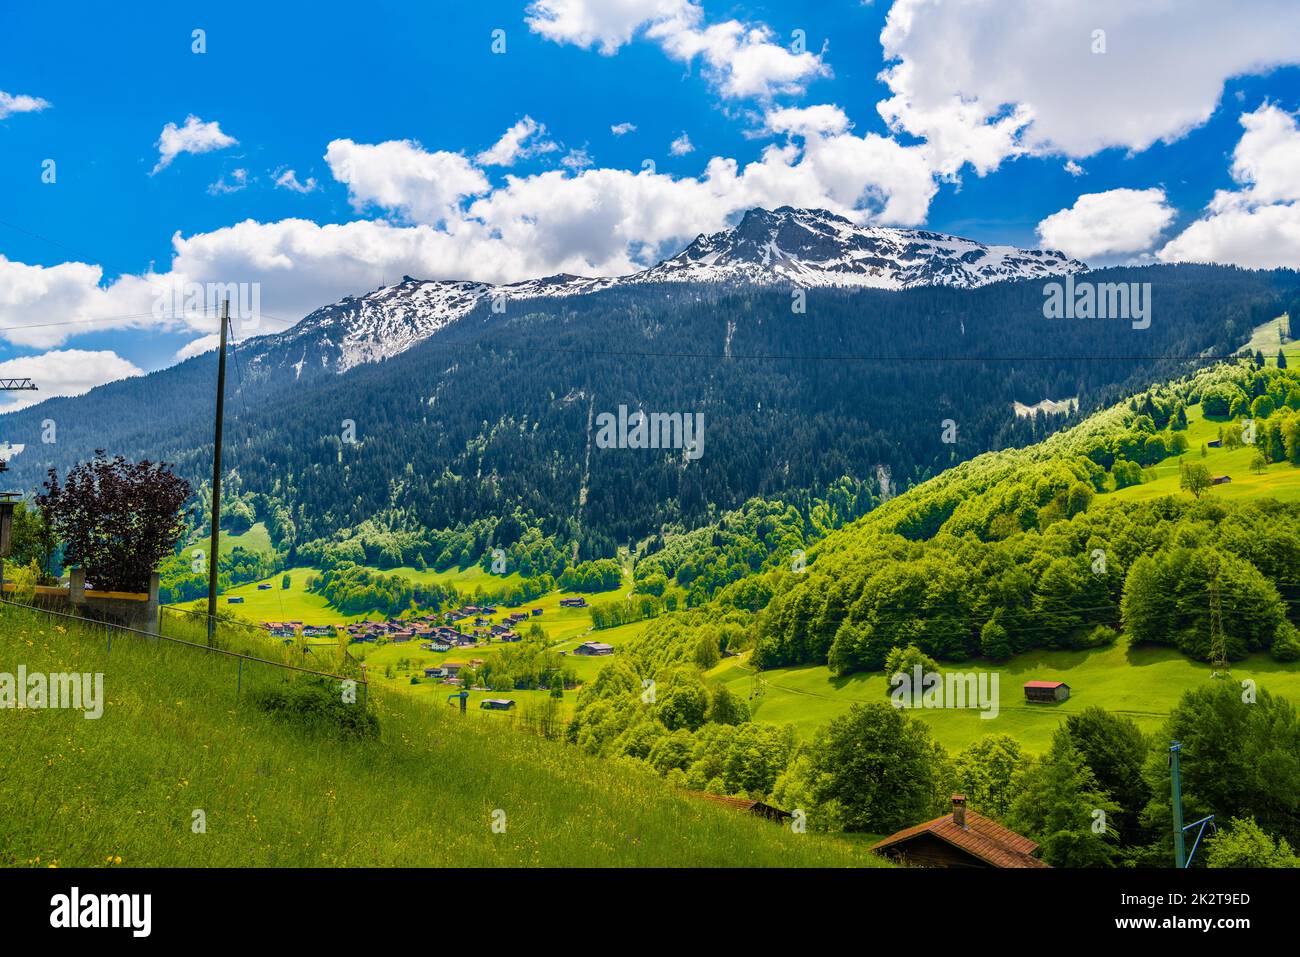 Hills mountains with forest Klosters-Serneus, Davos, Graubuende Stock Photo